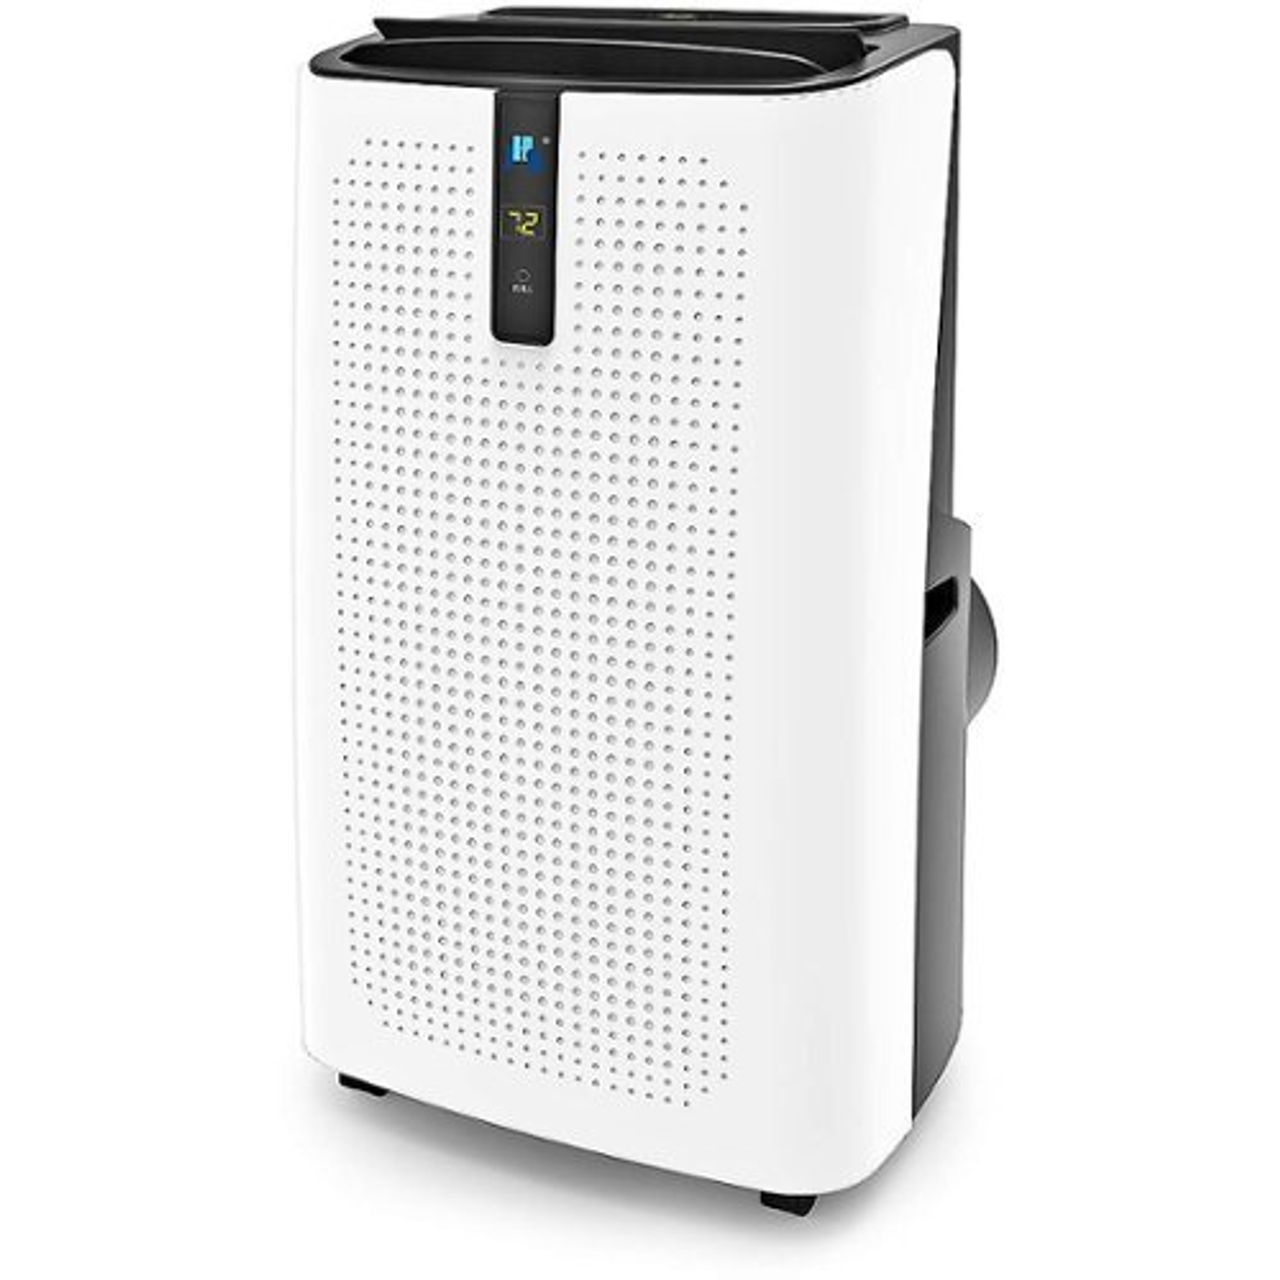 JHS - 3-in-1 12,000 BTU Portable Air Conditioner with Dehumidifer, Fan | Remote Control | For Rooms up to 450 Sq.Ft. - White